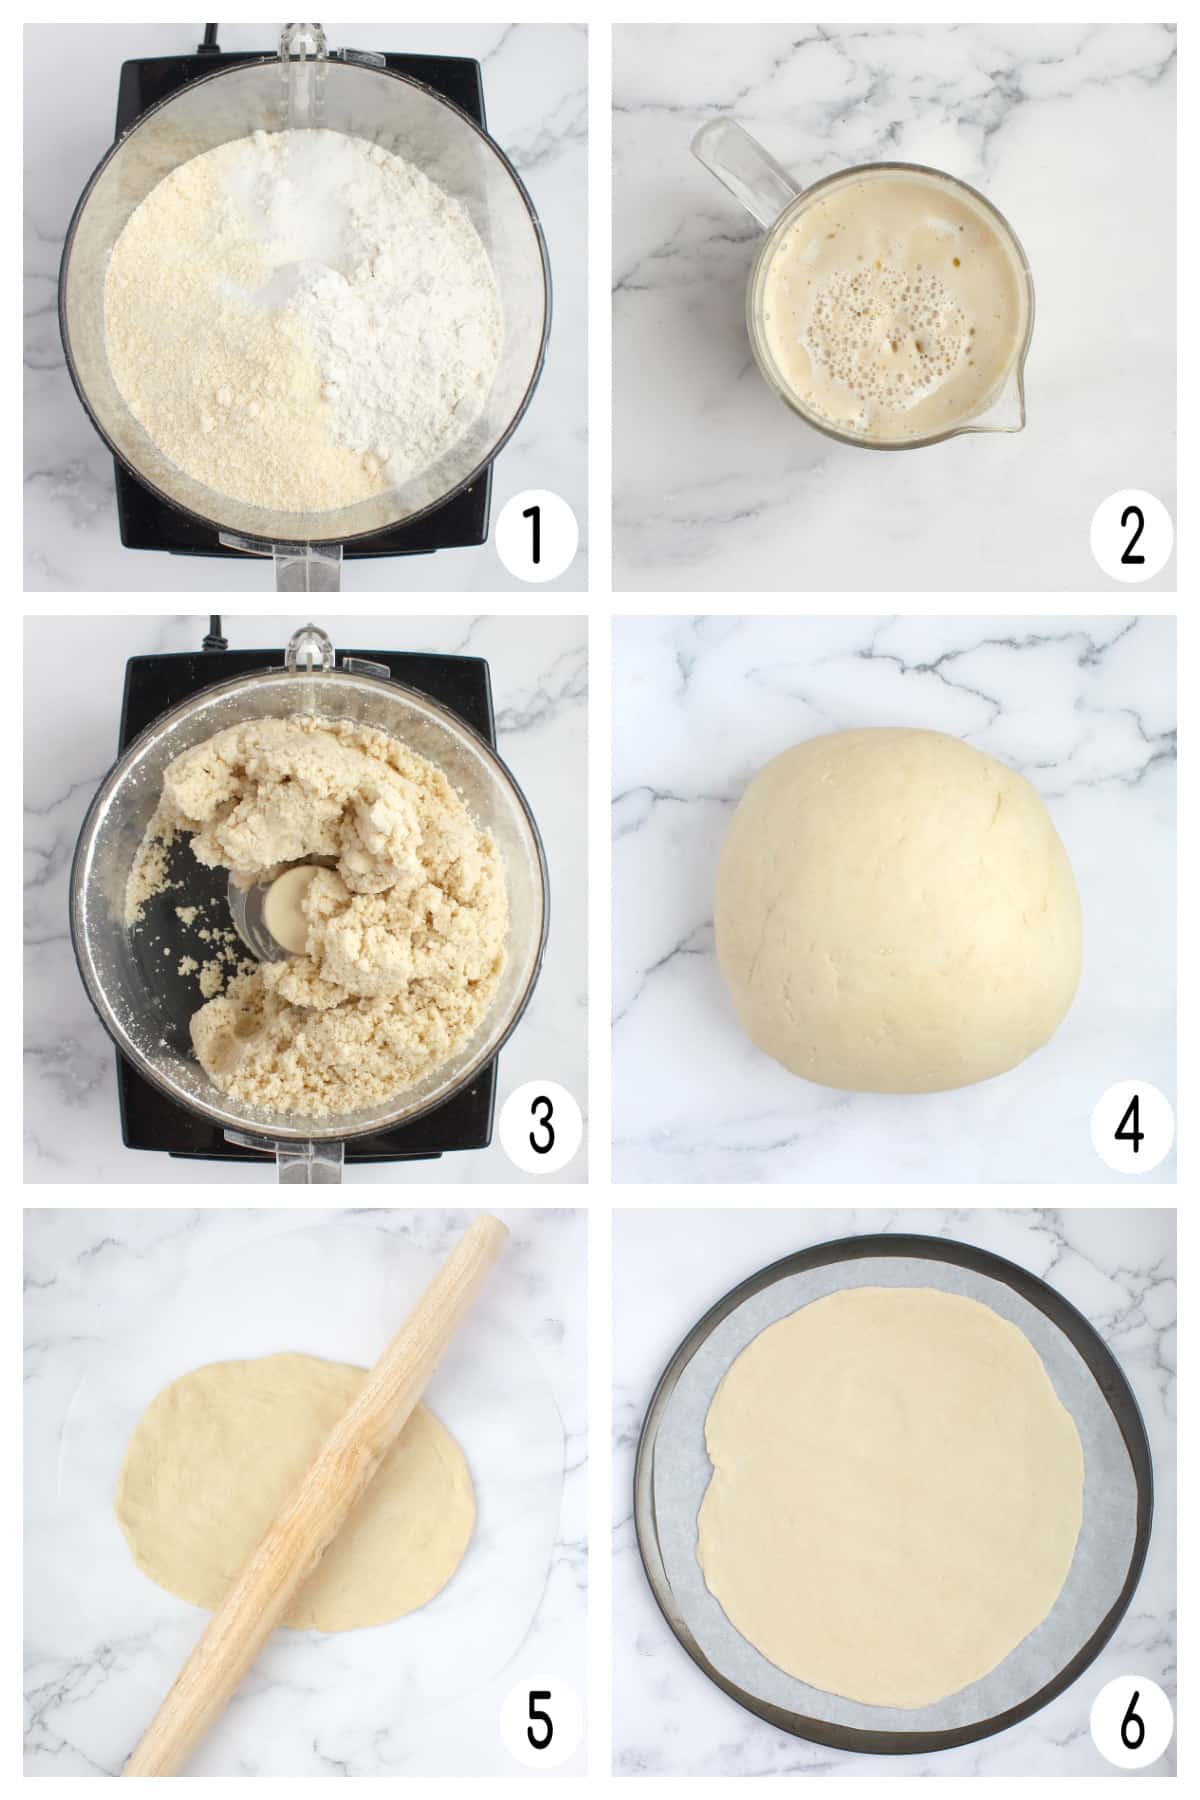 Process shots for how to make homemade pizza dough.